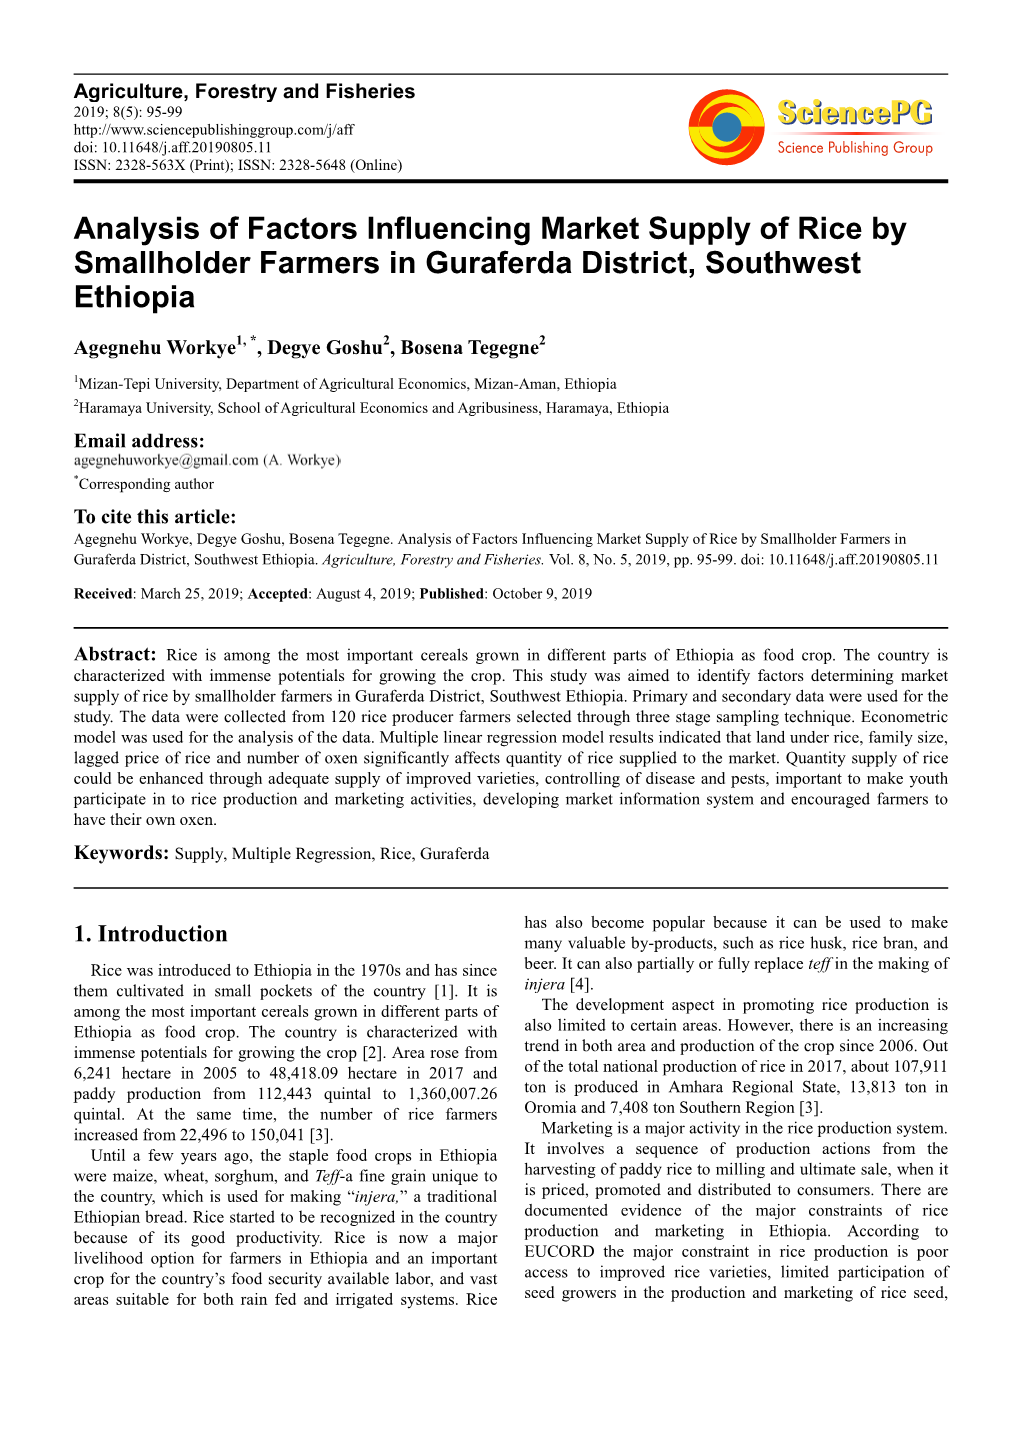 Analysis of Factors Influencing Market Supply of Rice by Smallholder Farmers in Guraferda District, Southwest Ethiopia